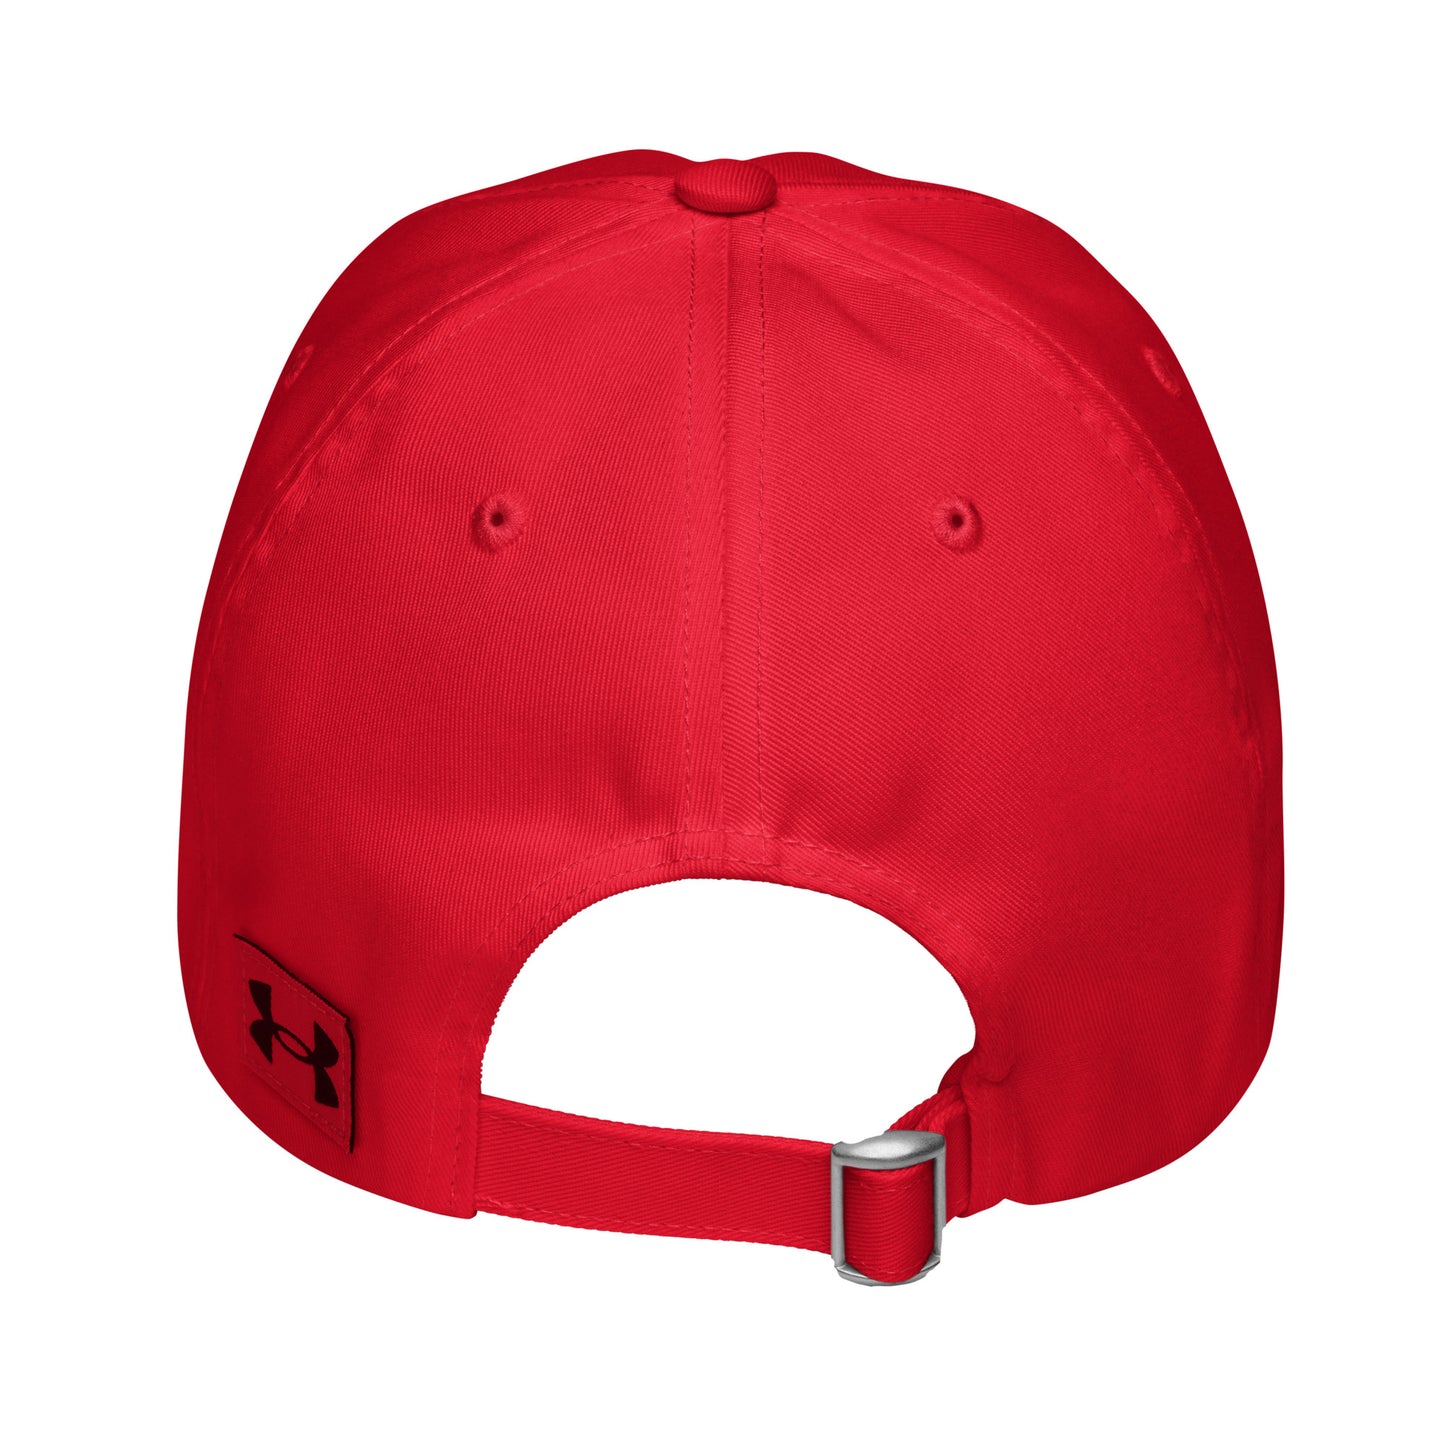 Old School Red Baseball Cap - 78G Lifestyle Exclusive Design - Under Armor®